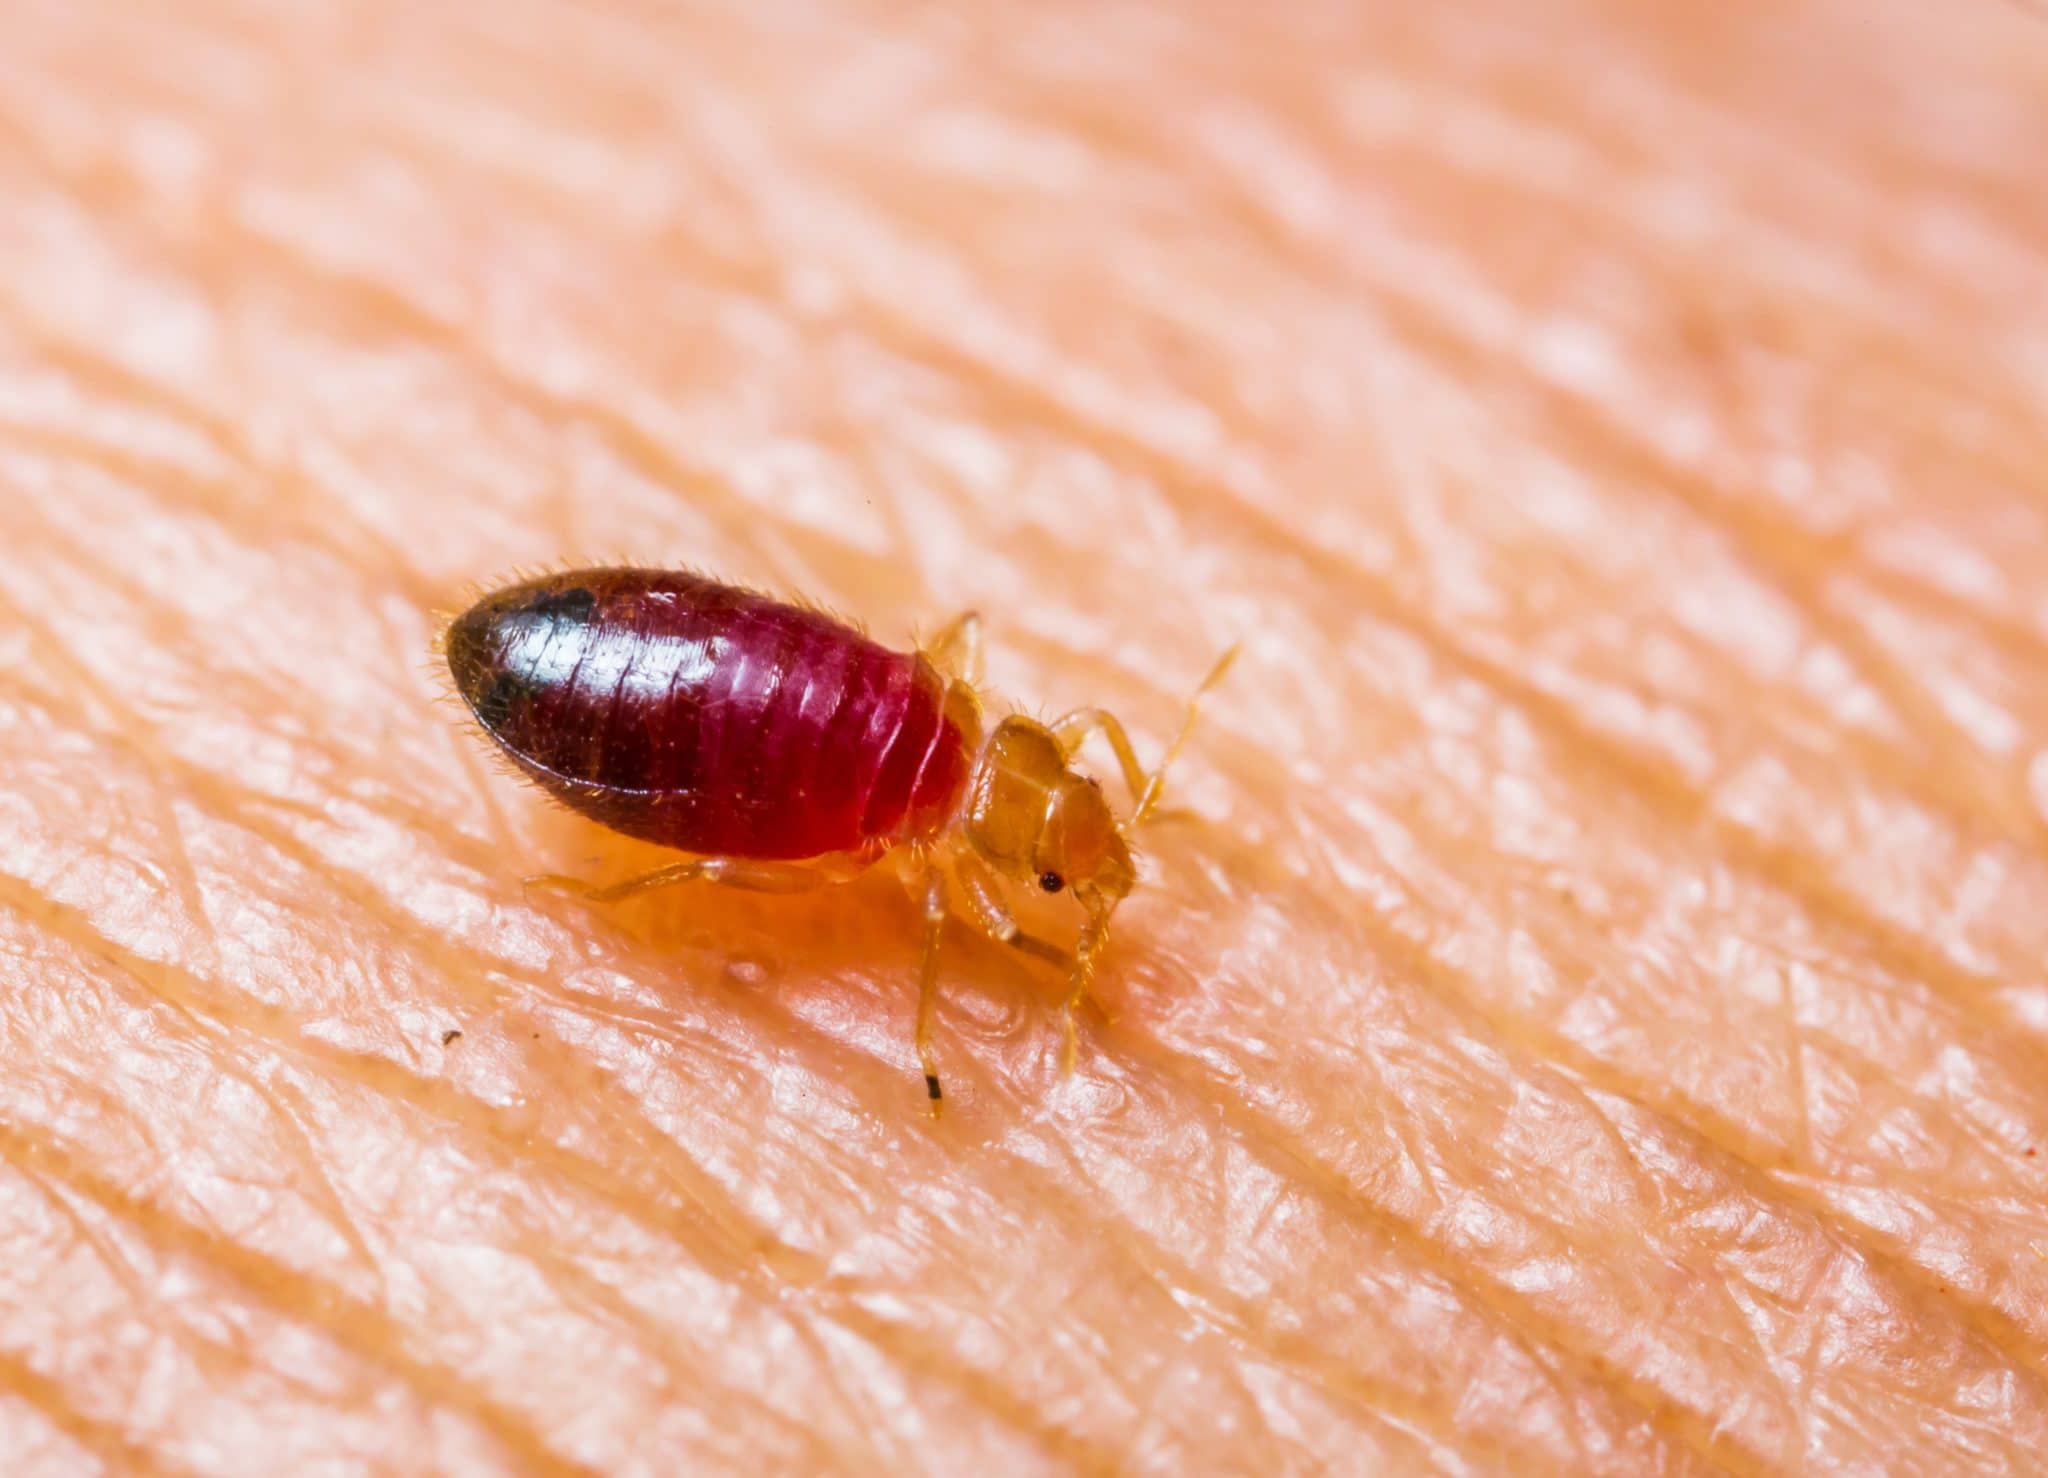 How to make bed bug bites go away , Natural bed bug spray FL , Spray to repel bed bugs , What can you put on bed bug bites , Bed bug bite spray Coral Springs , Relieve bed bug bites